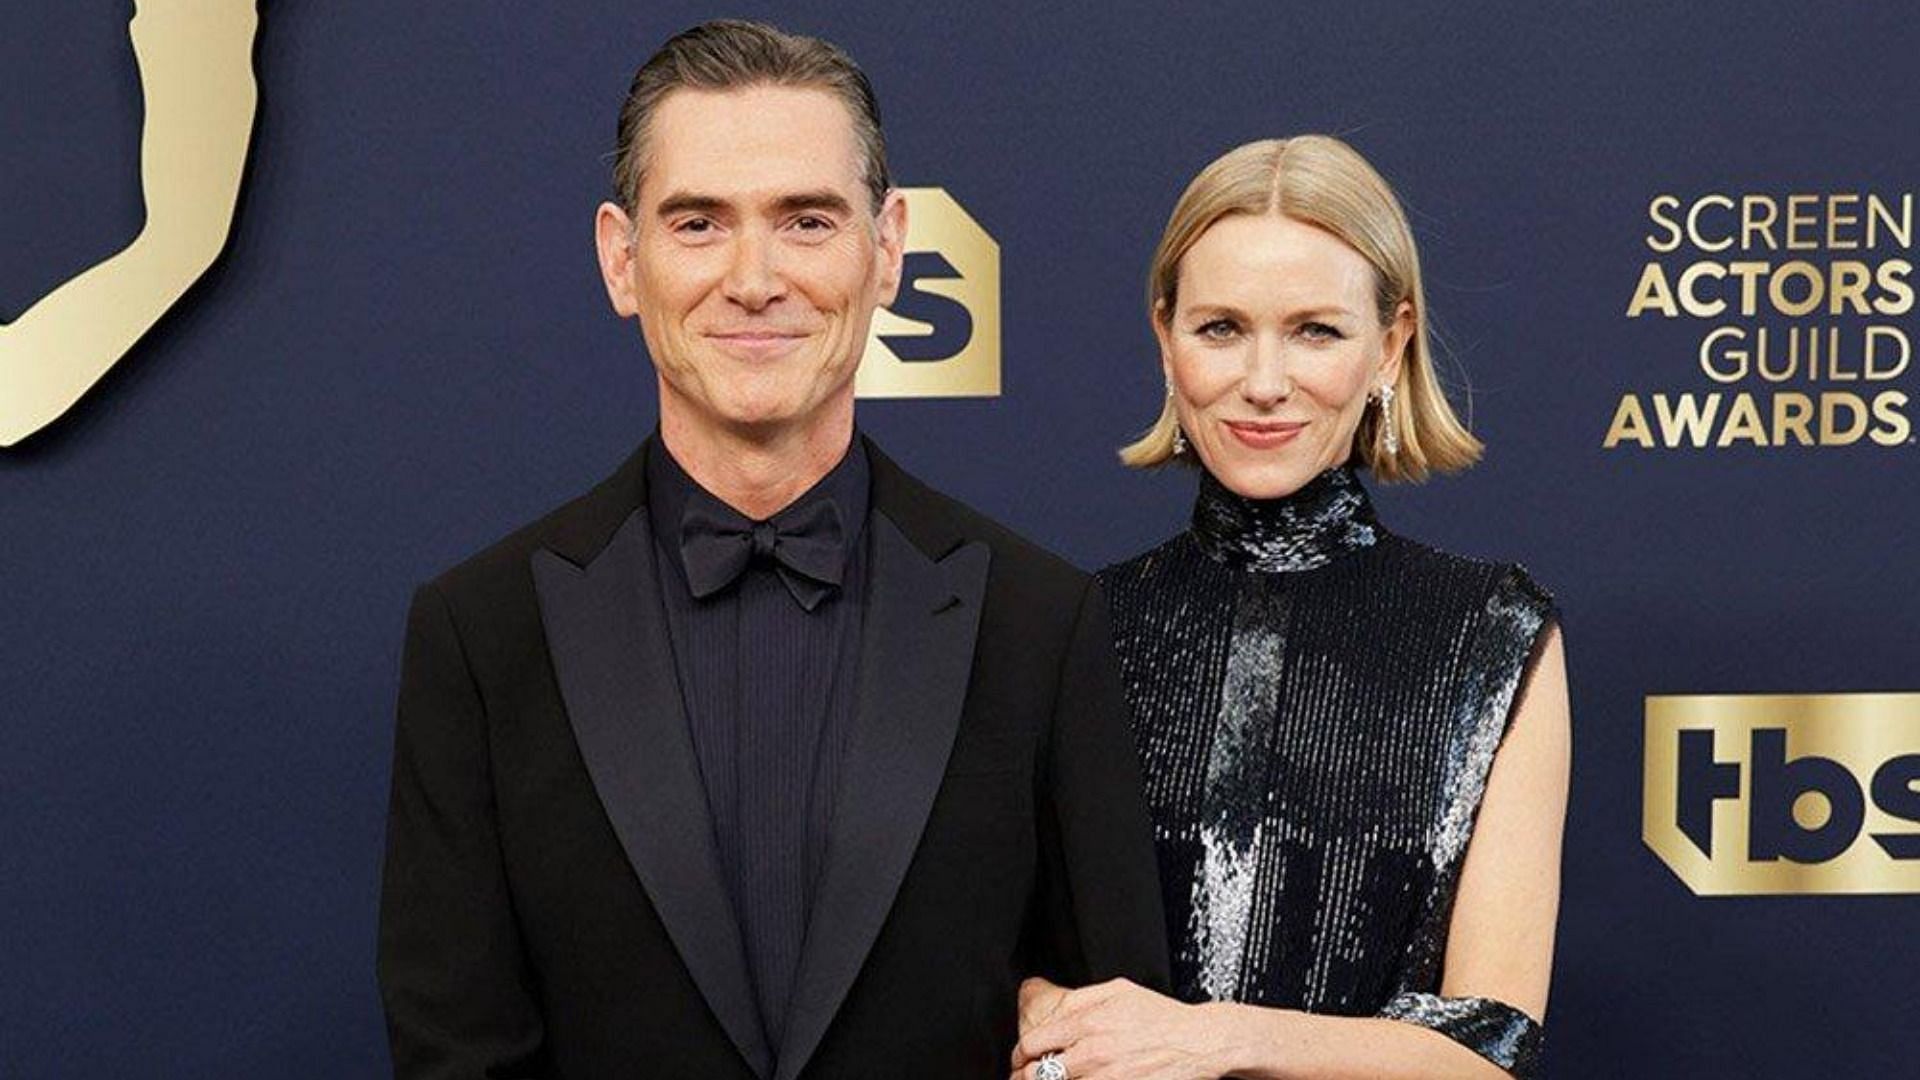 Naomi Watts and Billy Crudup have been dating privately since 2017 (Image via Getty Images/ Frazer Harrison)